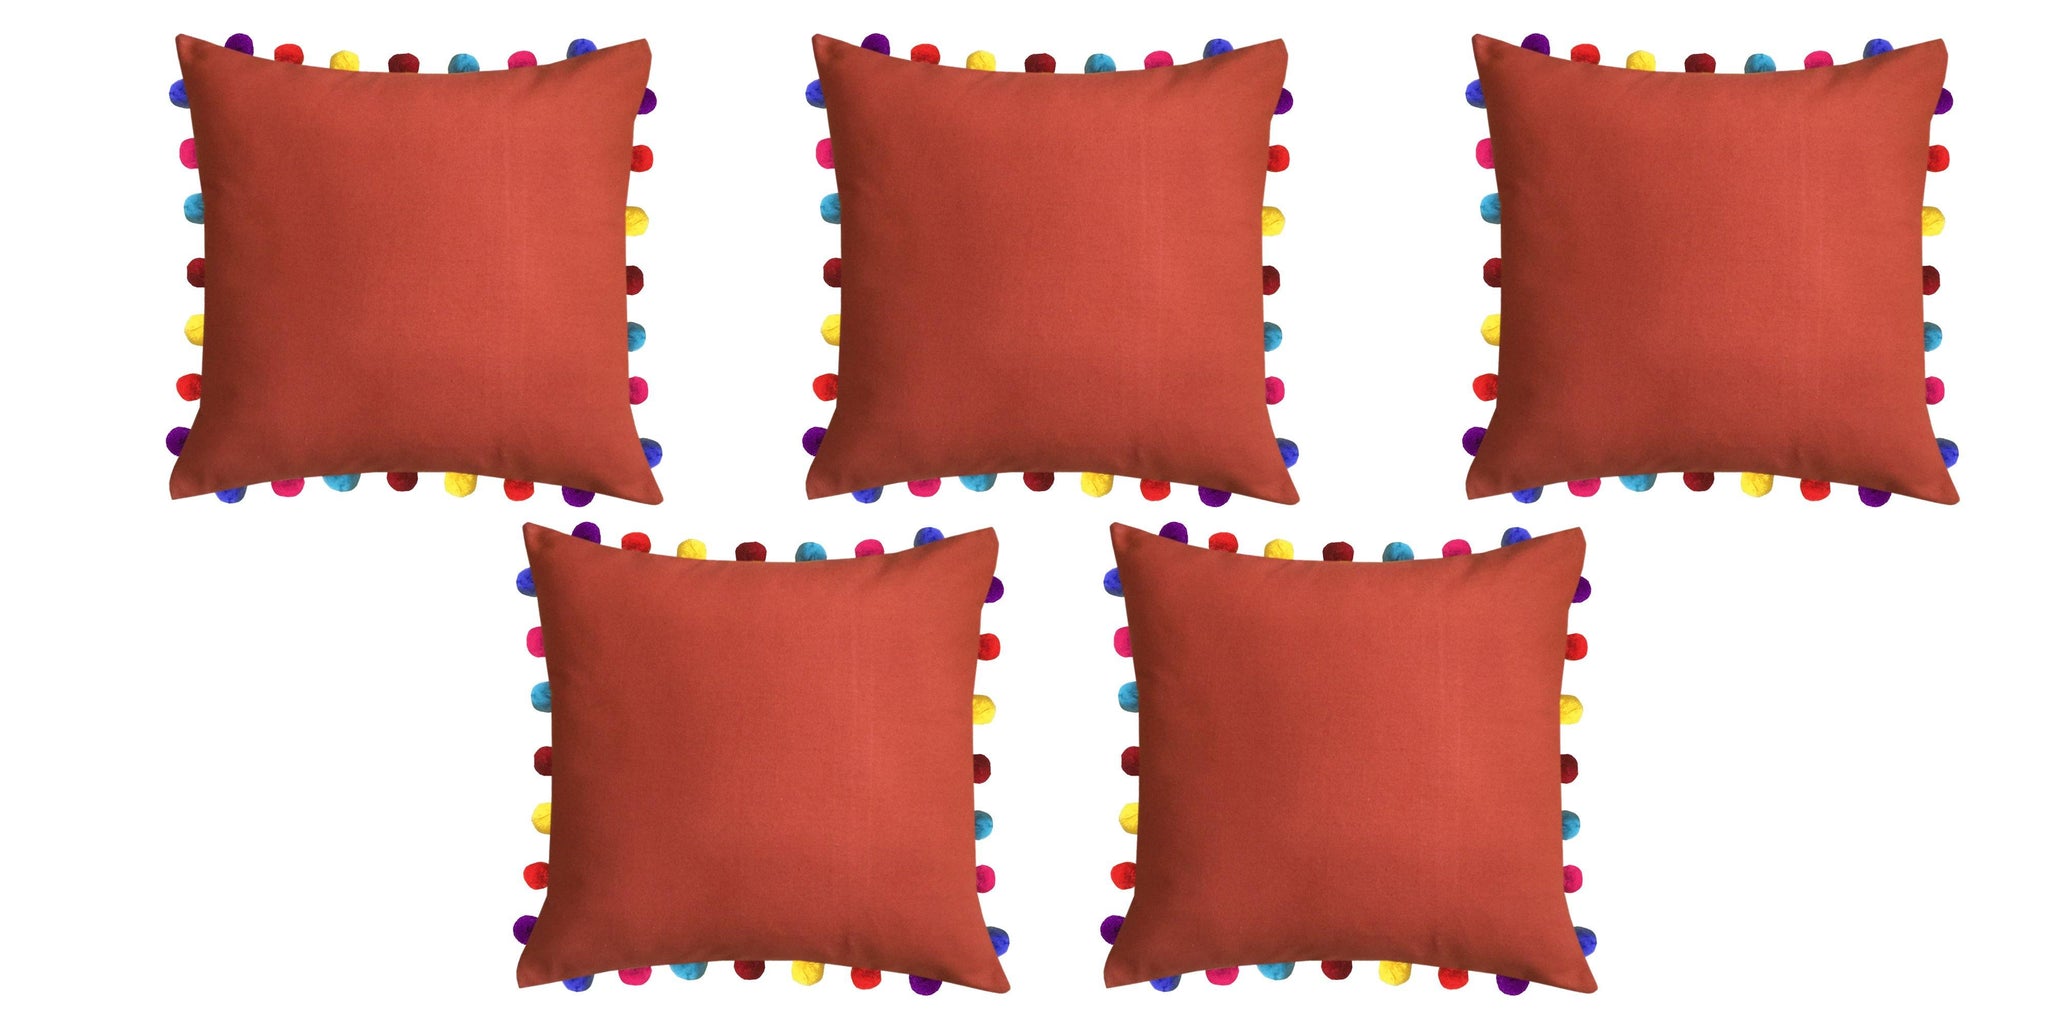 Lushomes Red Wood Cushion Cover with Colorful Pom Poms (5 pcs, 20 x 20”) - Lushomes